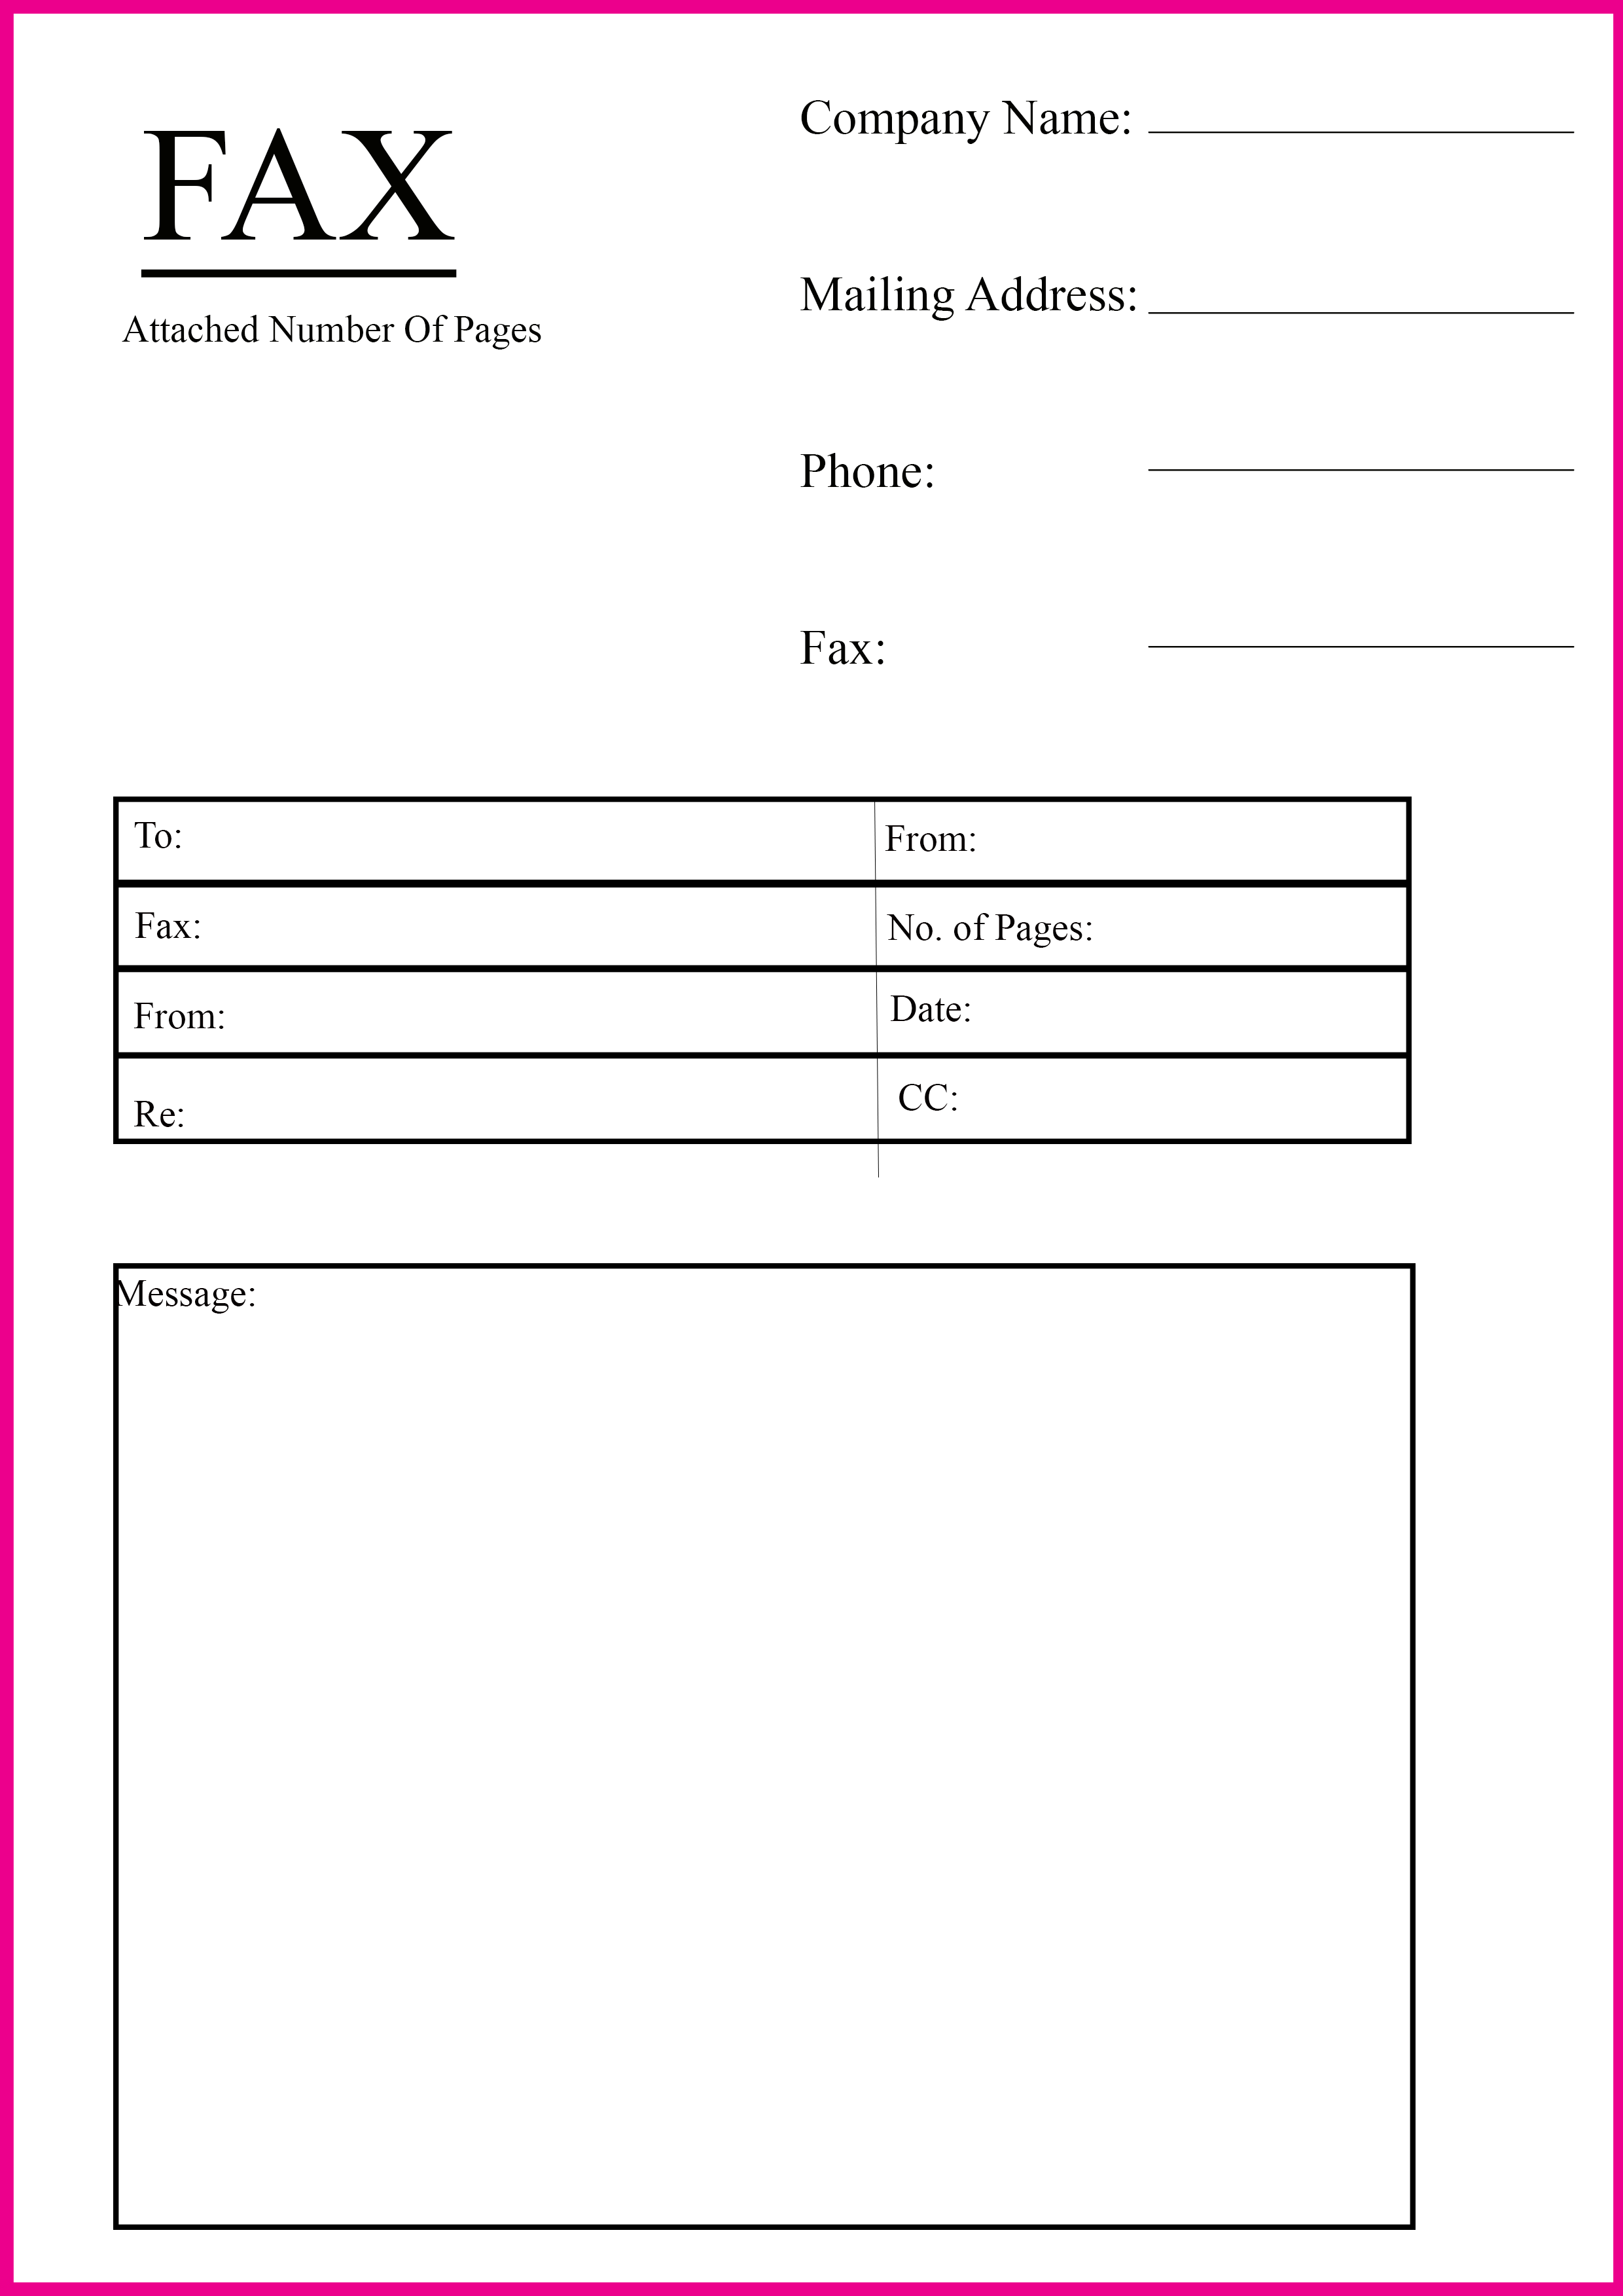 sample fax cover letter template